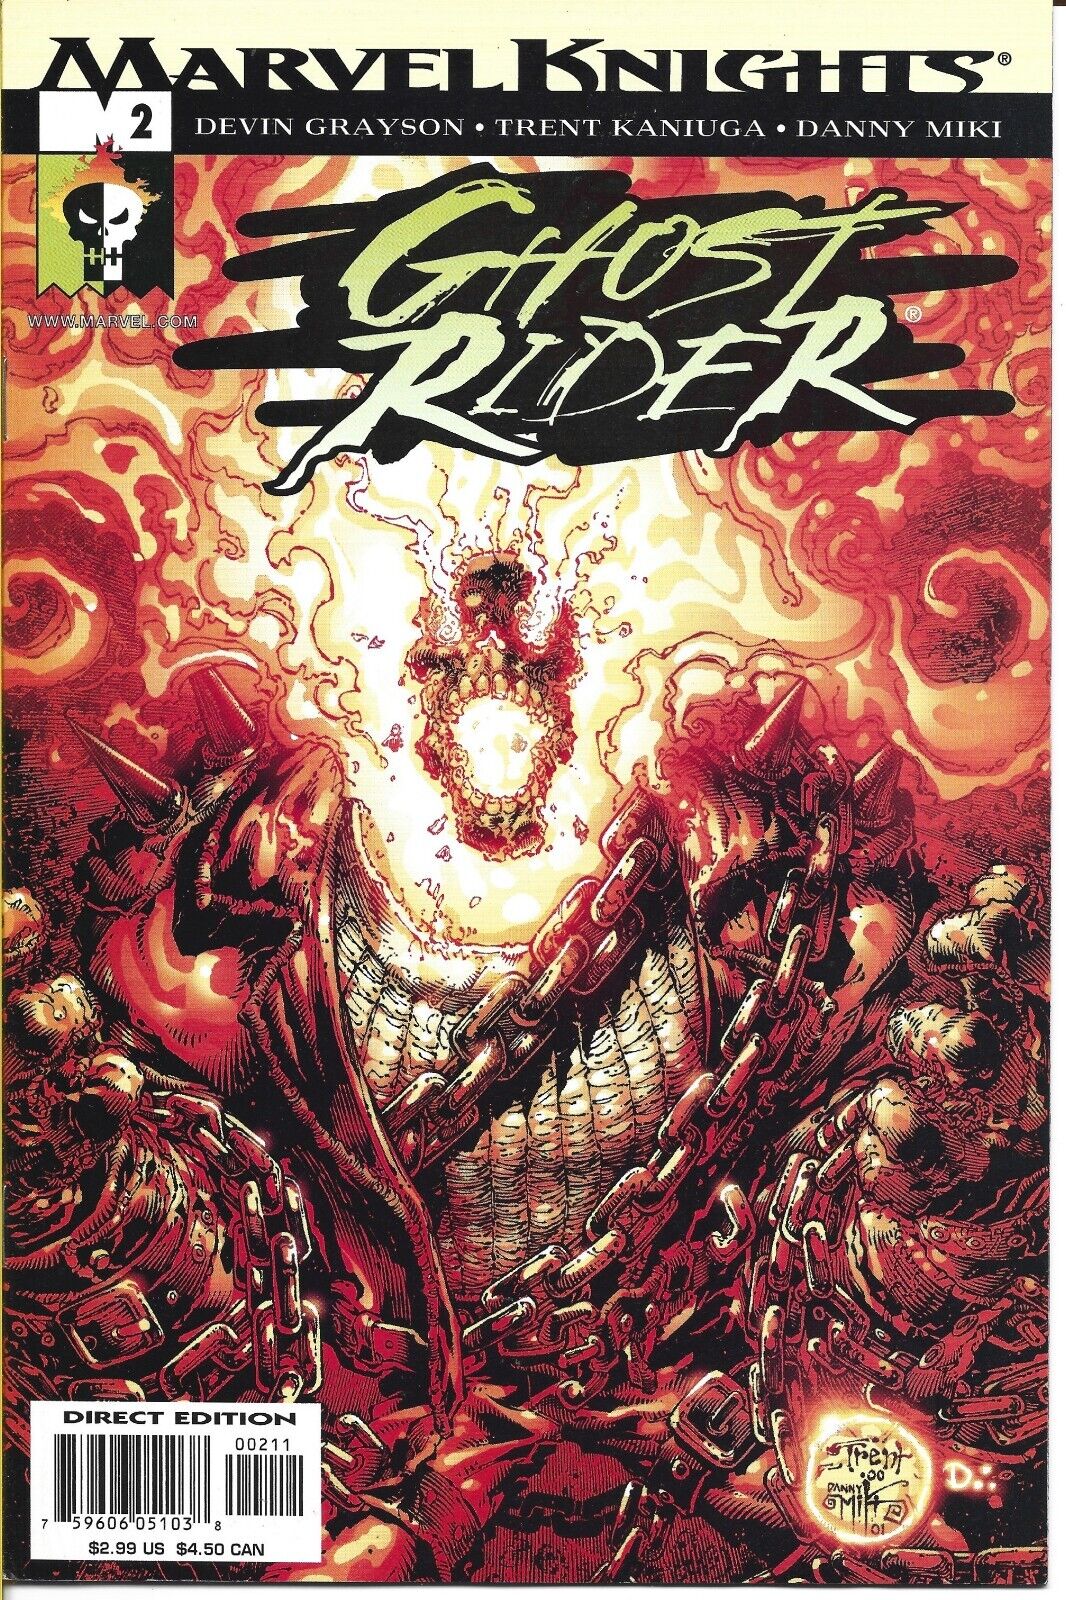 GHOST RIDER #2 MARVEL COMICS 2001 BAGGED AND BOARDED